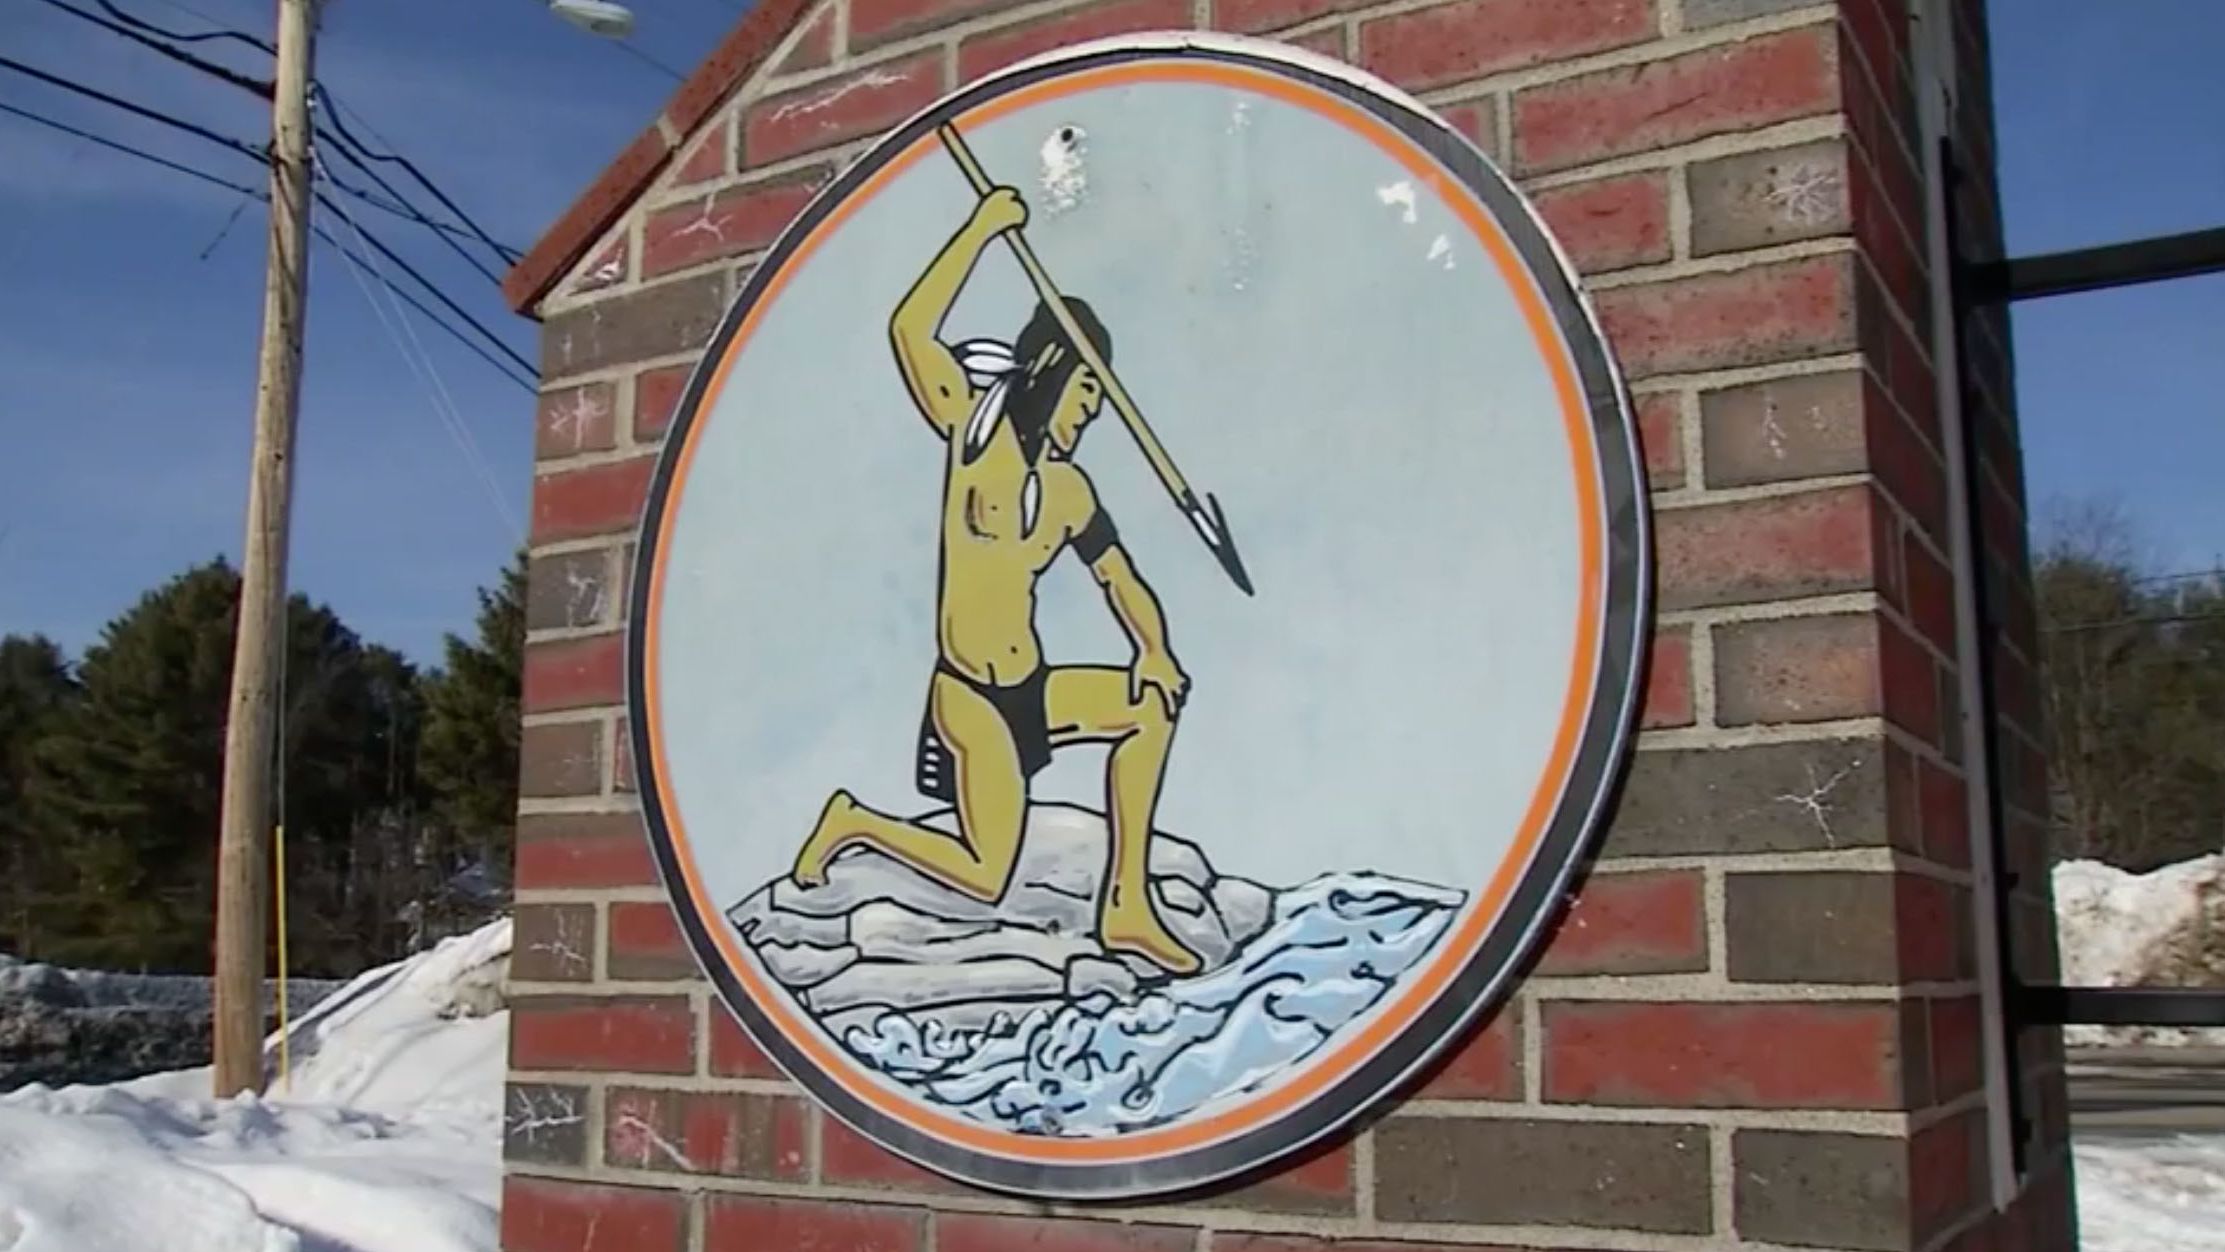 Skowhegan High School was the last high school in Maine with a Native American mascot. 